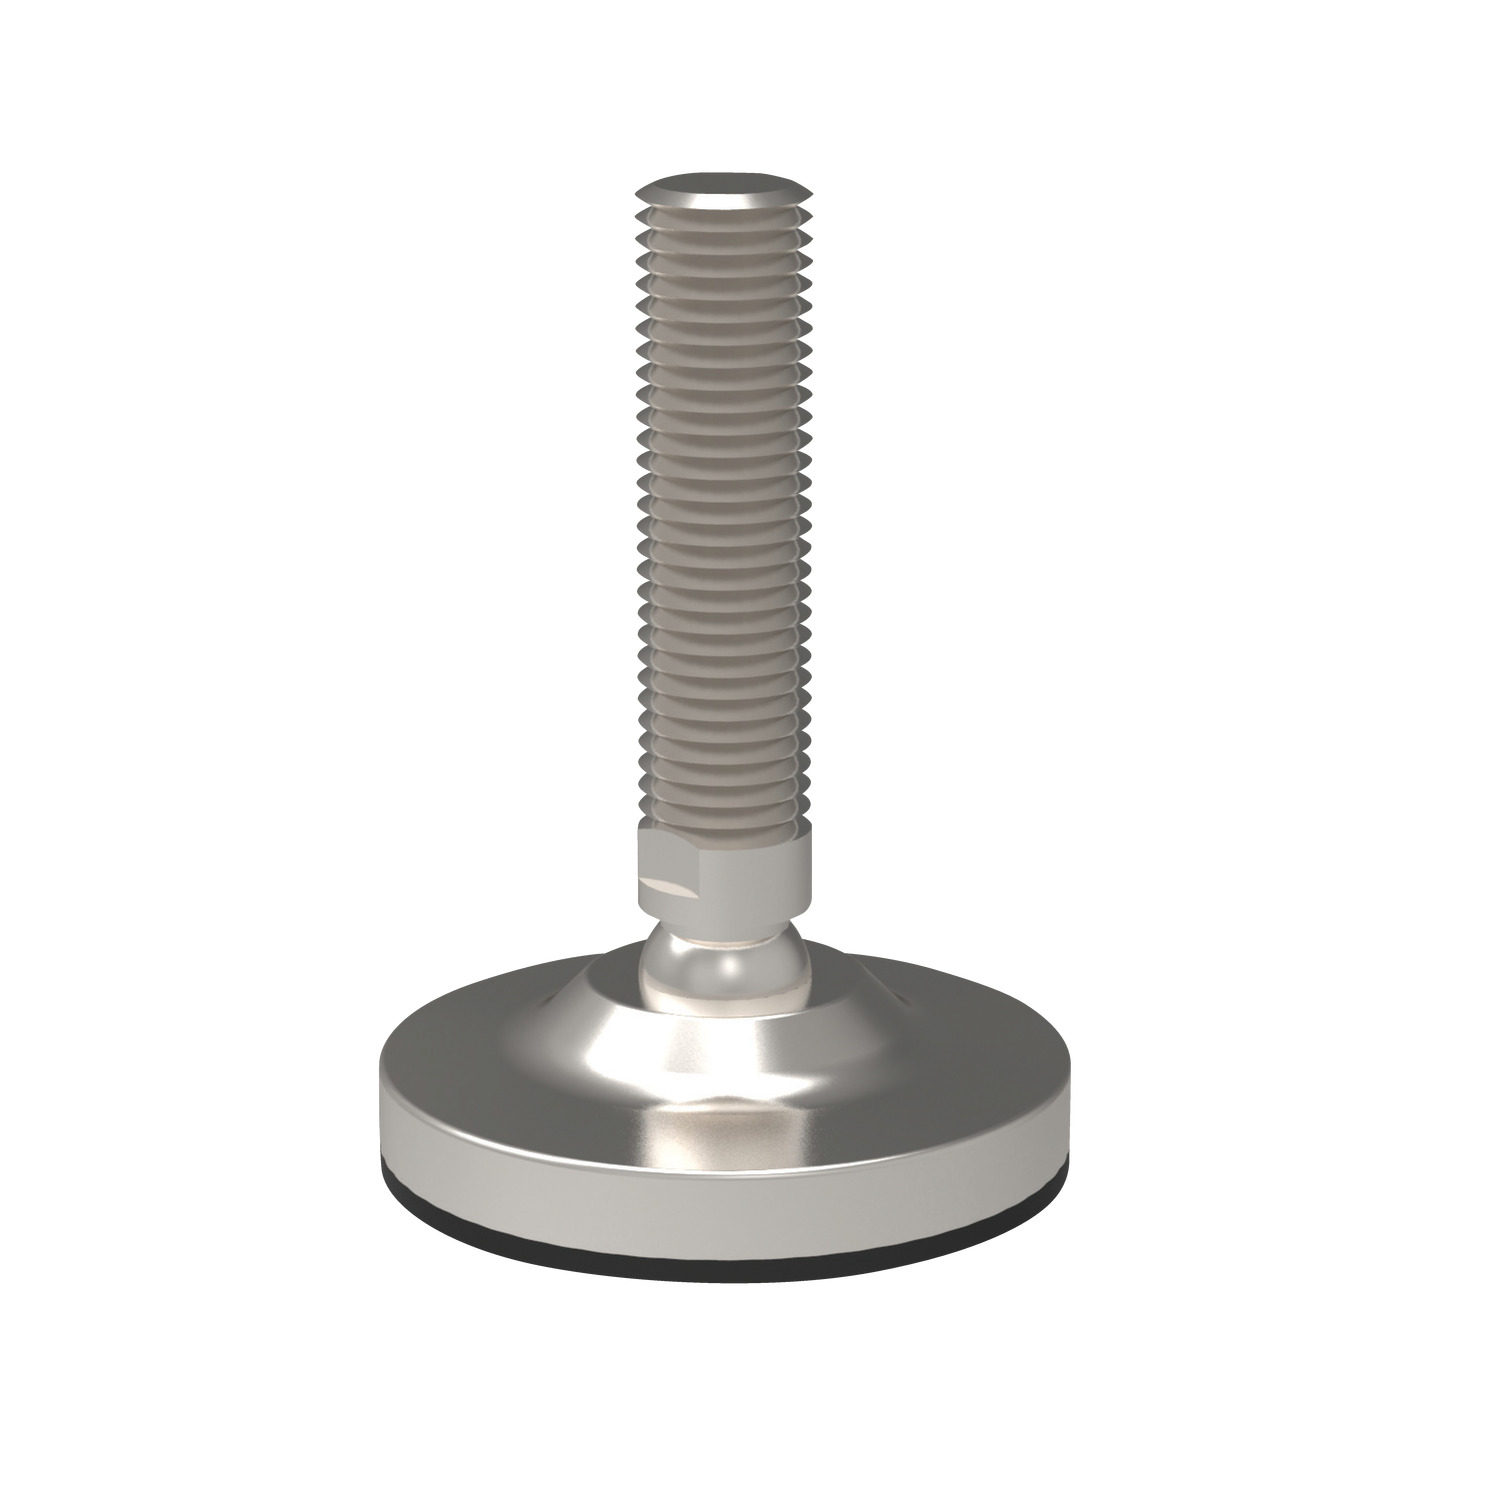 Mini Levelling Feet Miniature articulated levelling feet made from AISI 304 or AISI 316 stainless steel on request. Allows for up to 30° articulation.